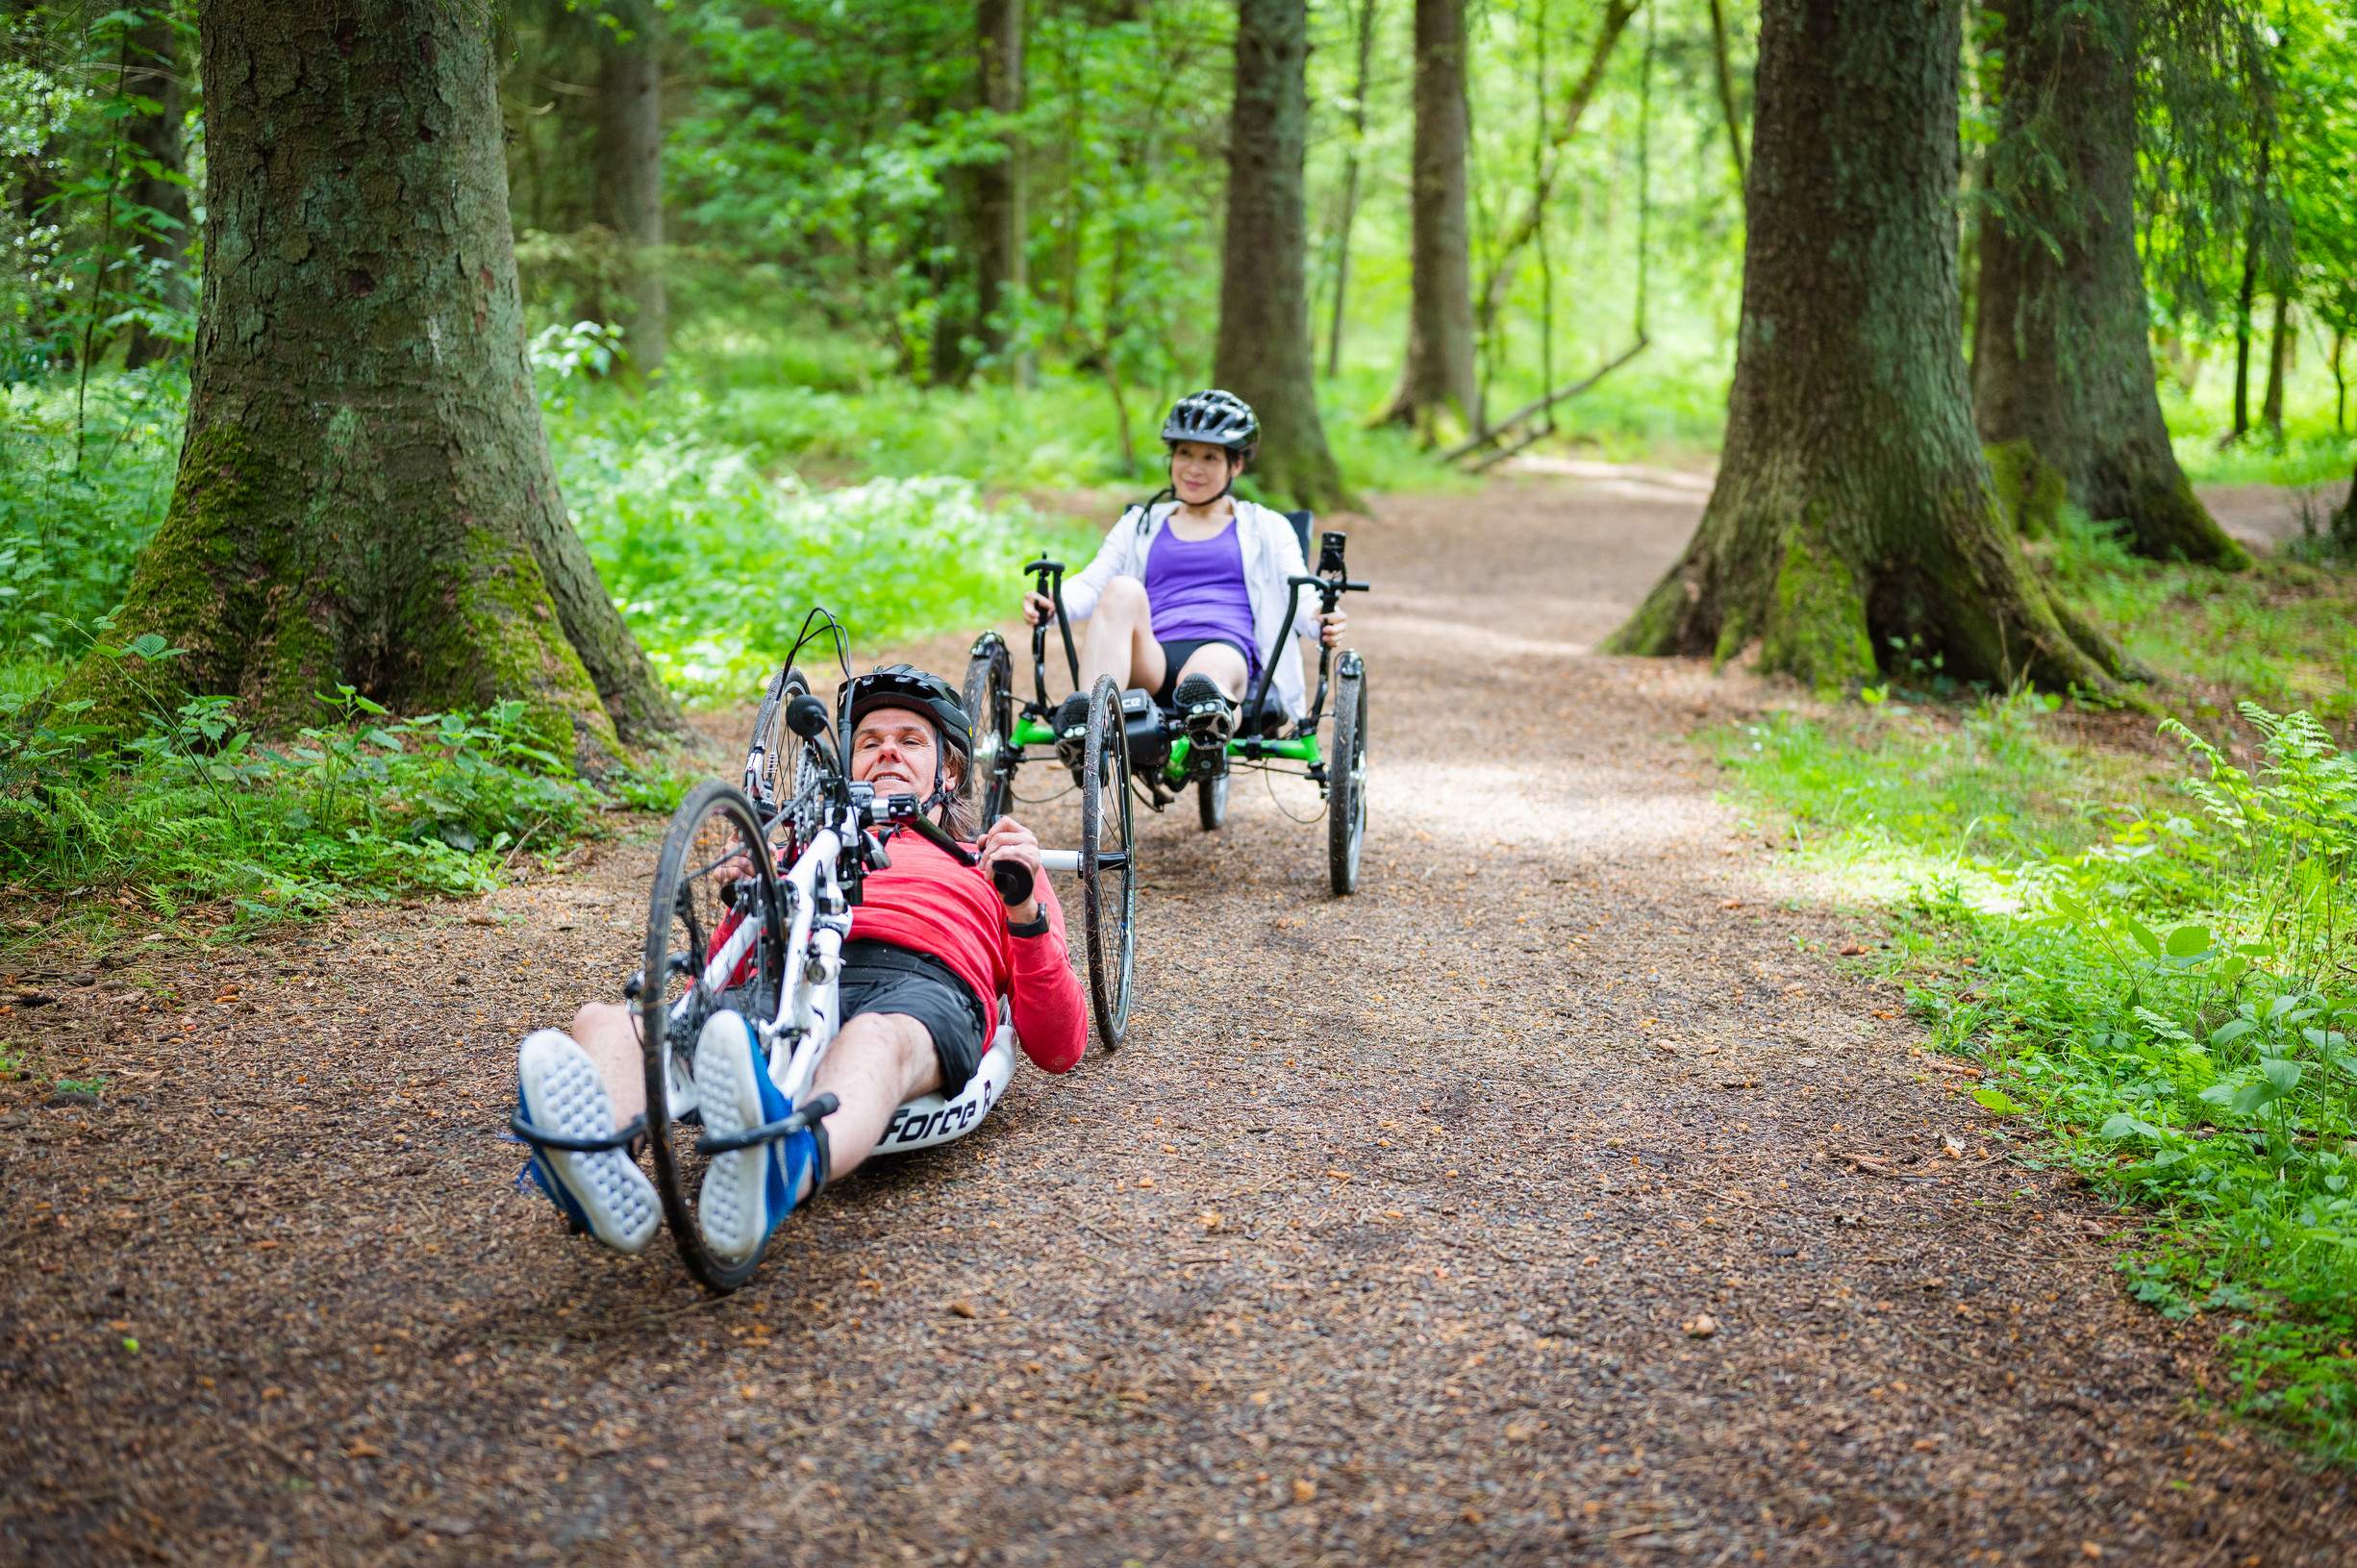 Woman on recumbent trike and man on recumbent hand crank cycle ride through forest